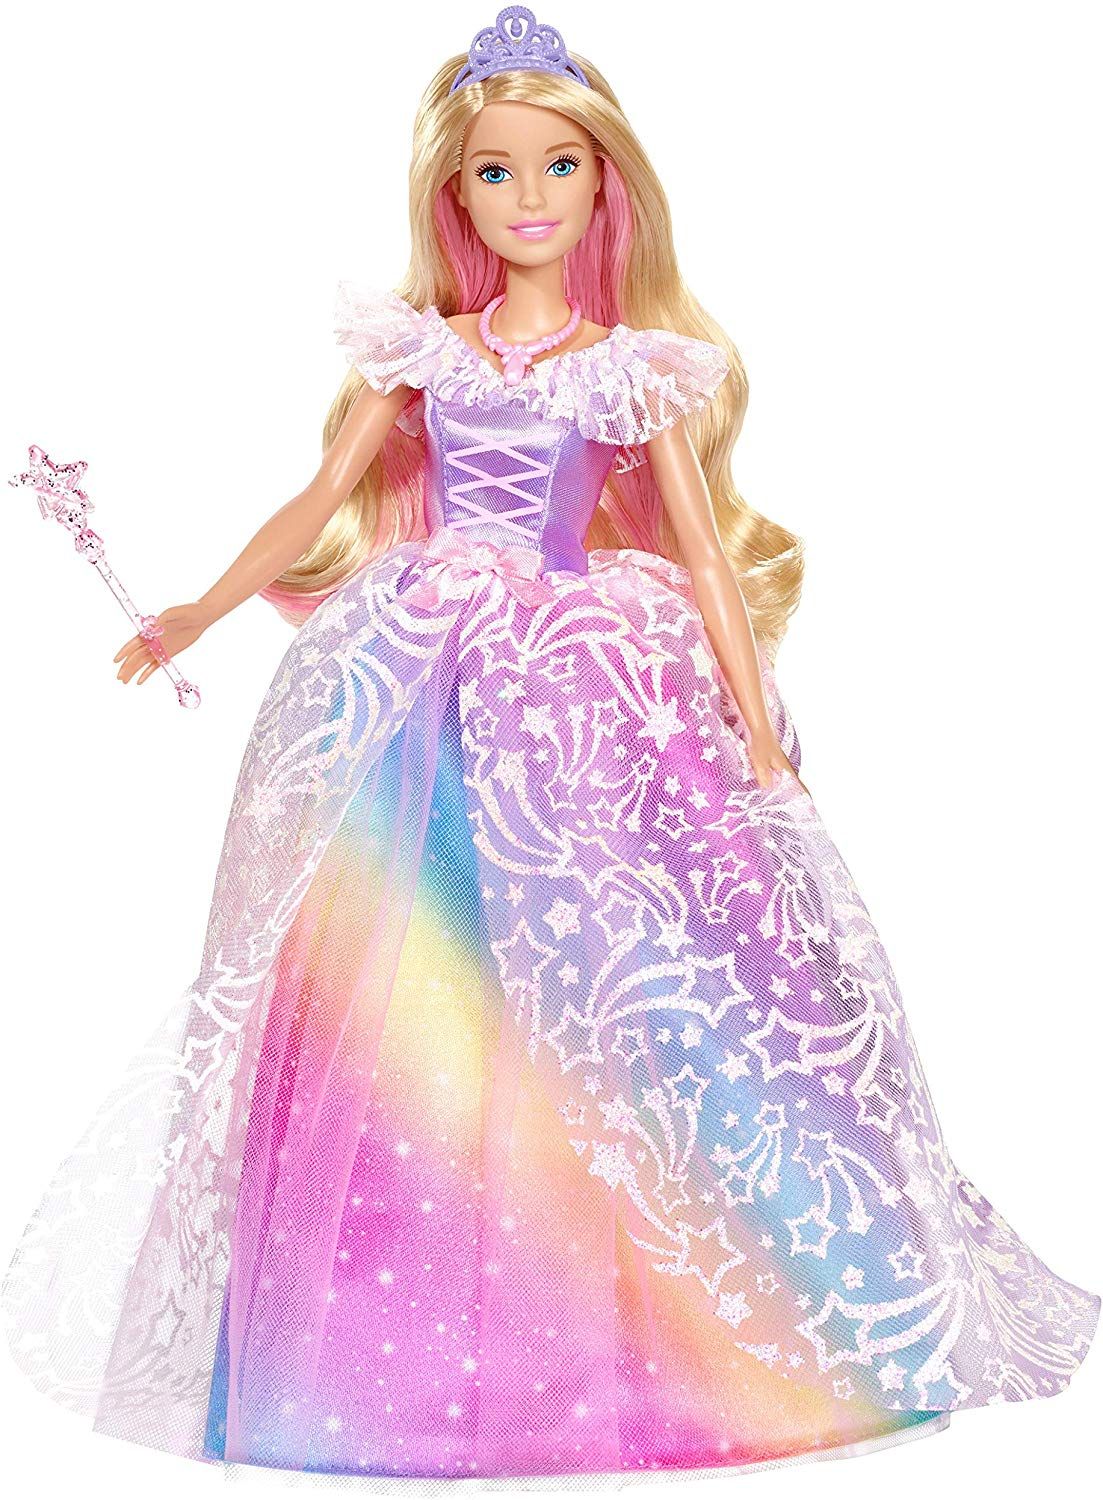 21 of the Best Barbie Gift Ideas Your Child Will